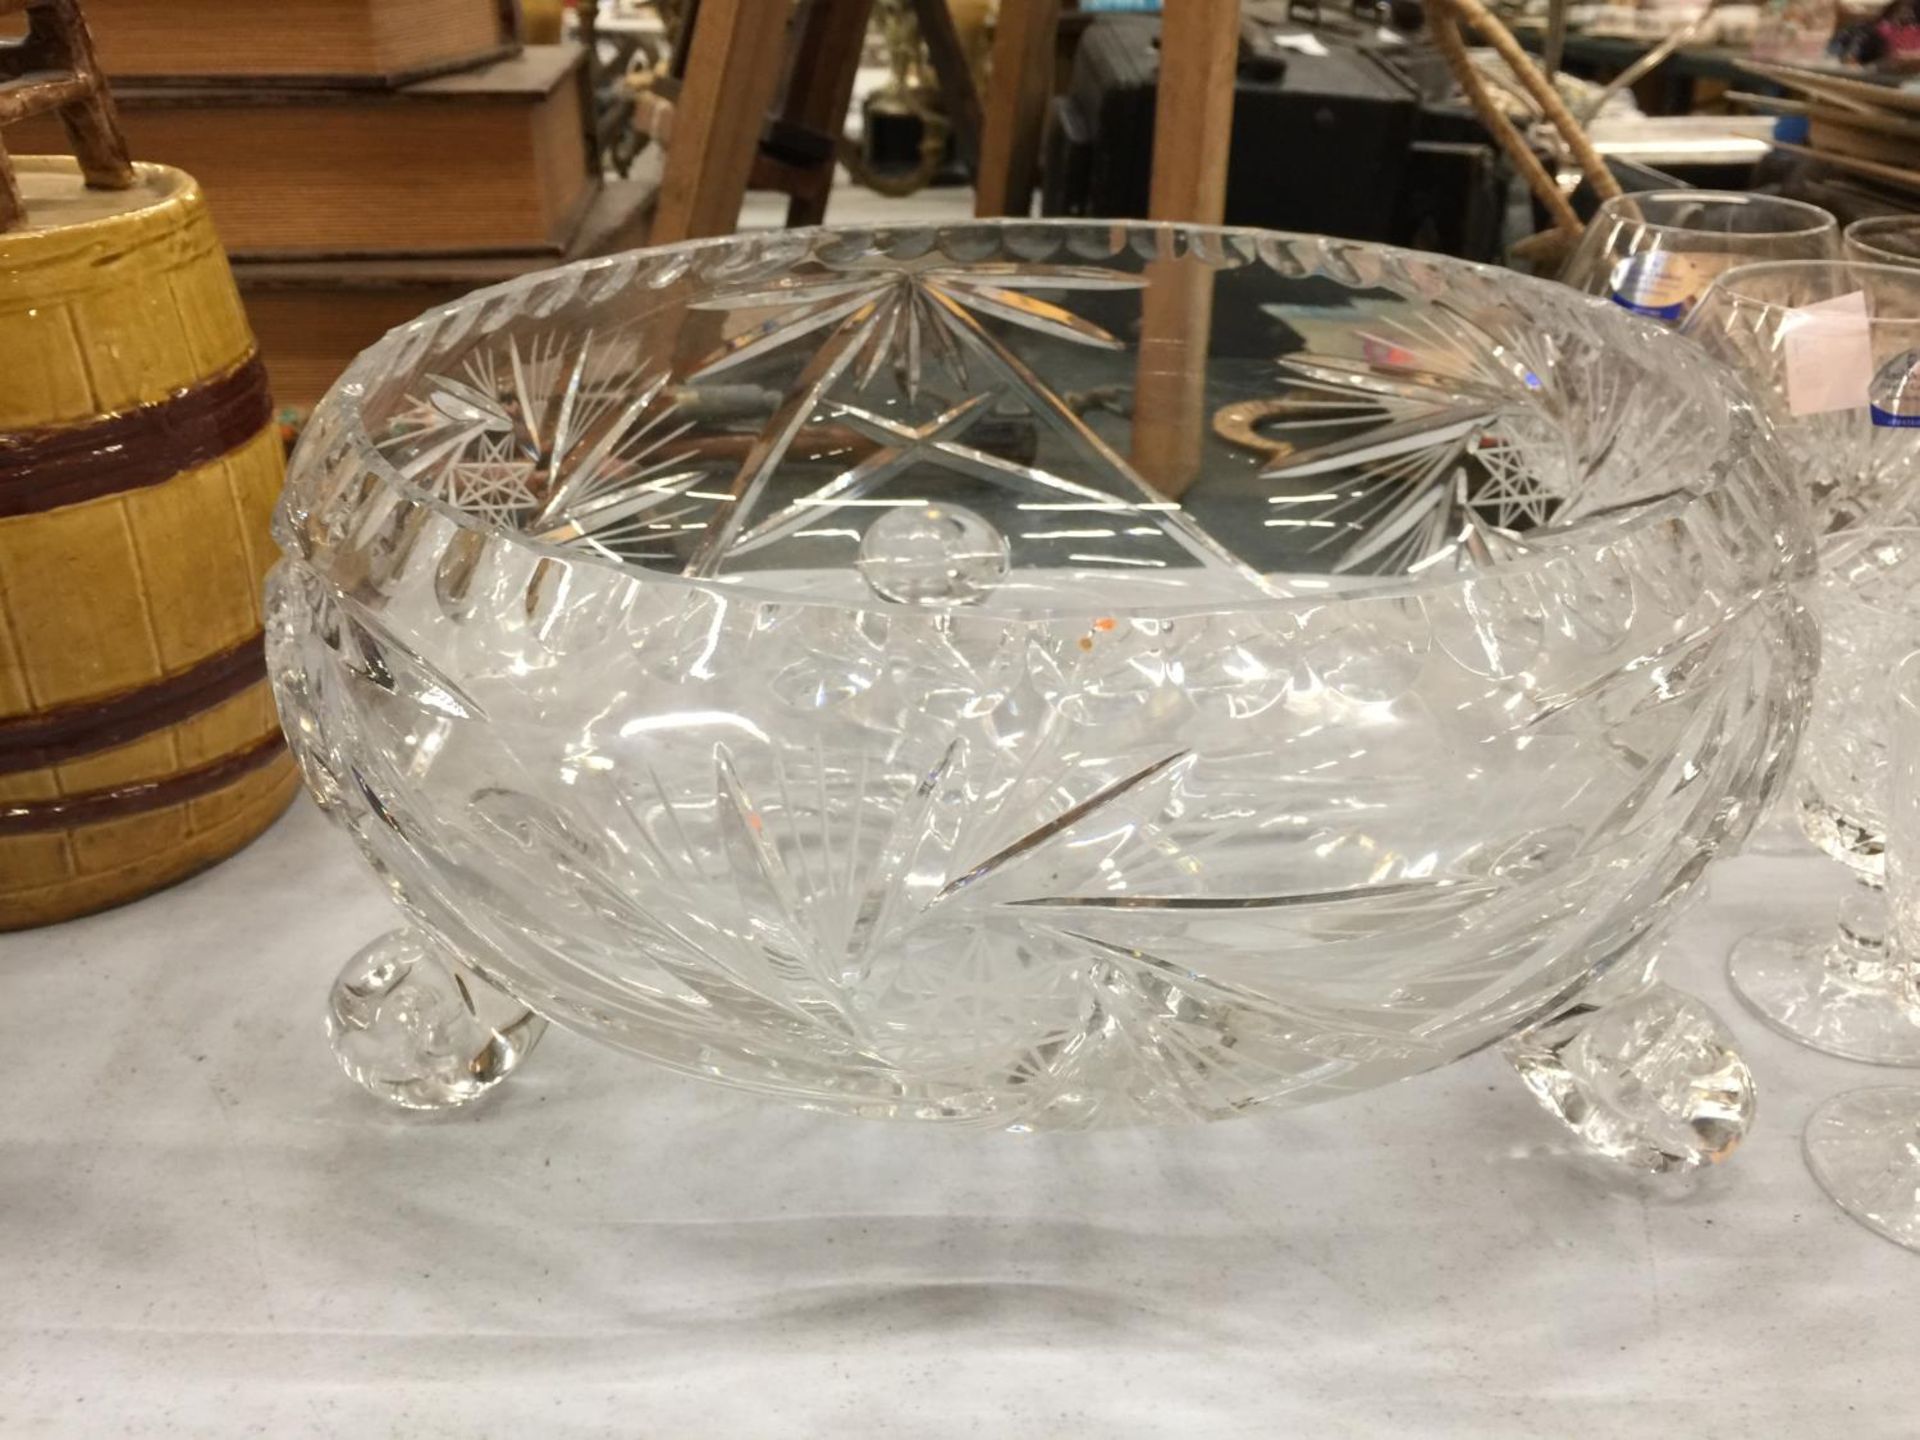 A LARGE CUT GLASS CRYSTAL FOOTED BOWL AND A SMALLER BOWL - Image 3 of 3